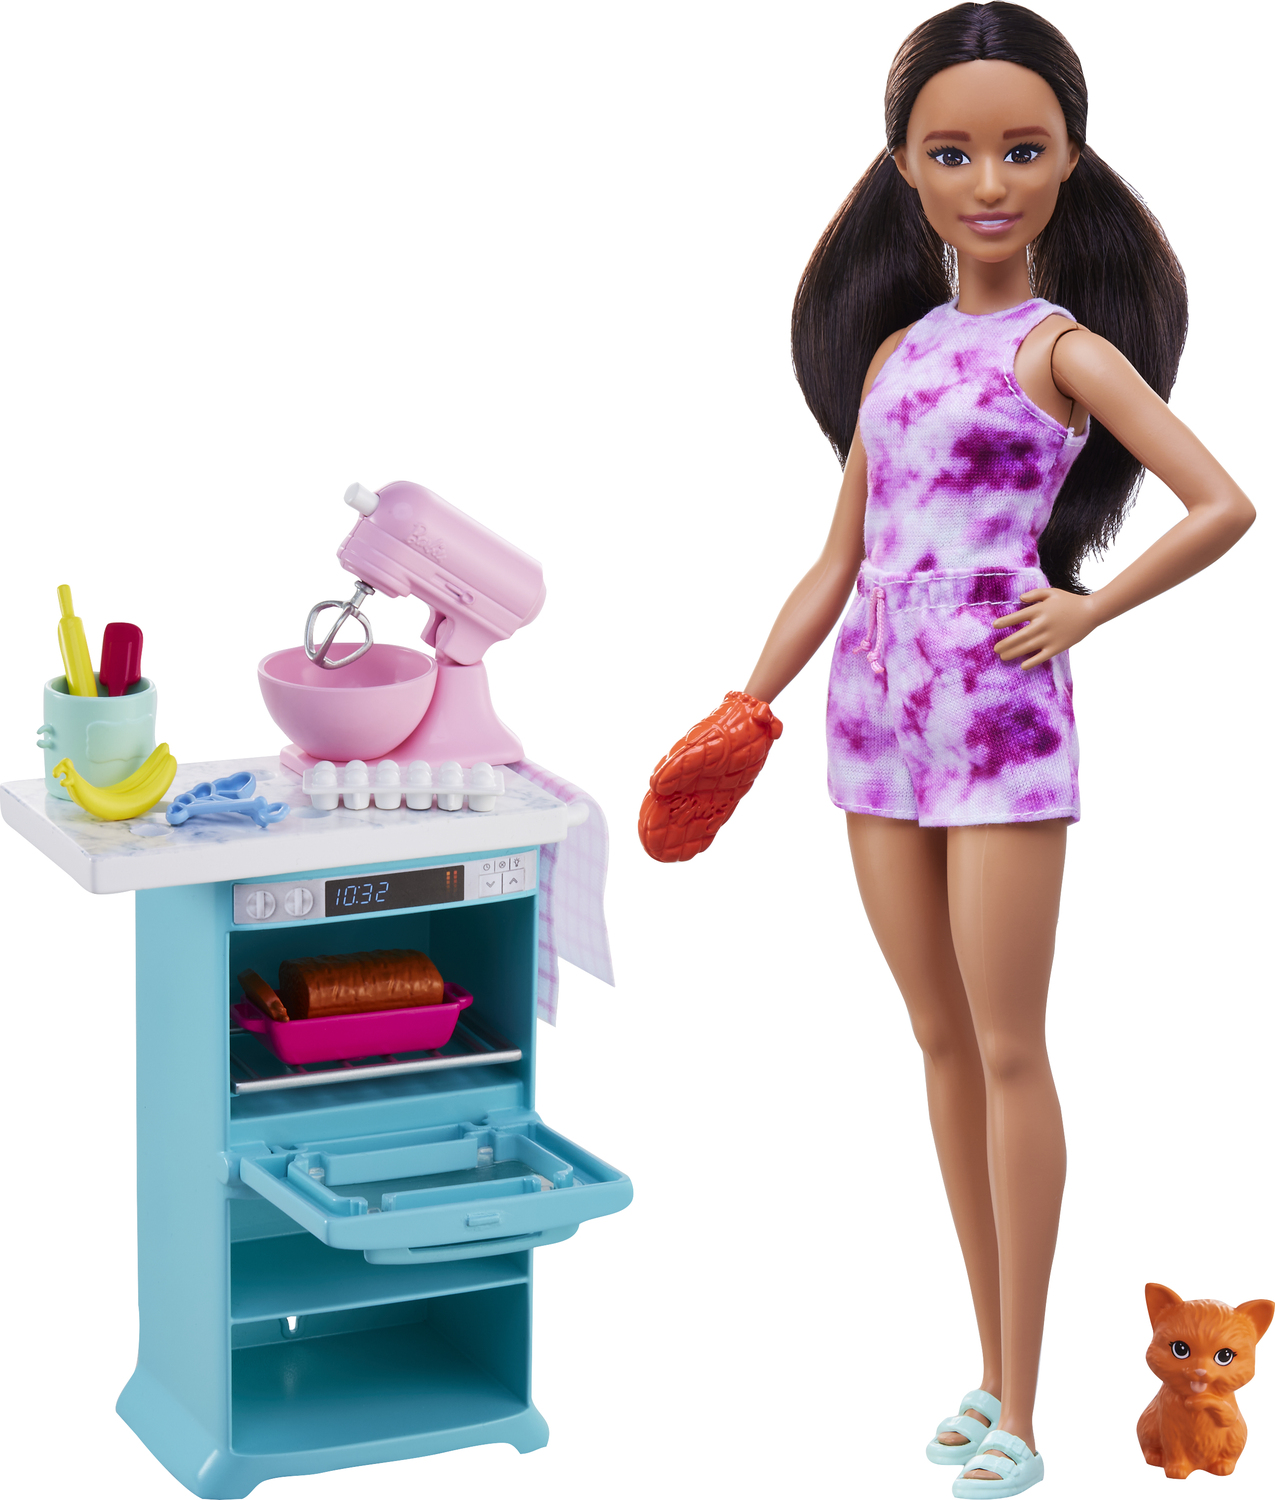 Barbie Doll And Accessories - The Toy Box Hanover